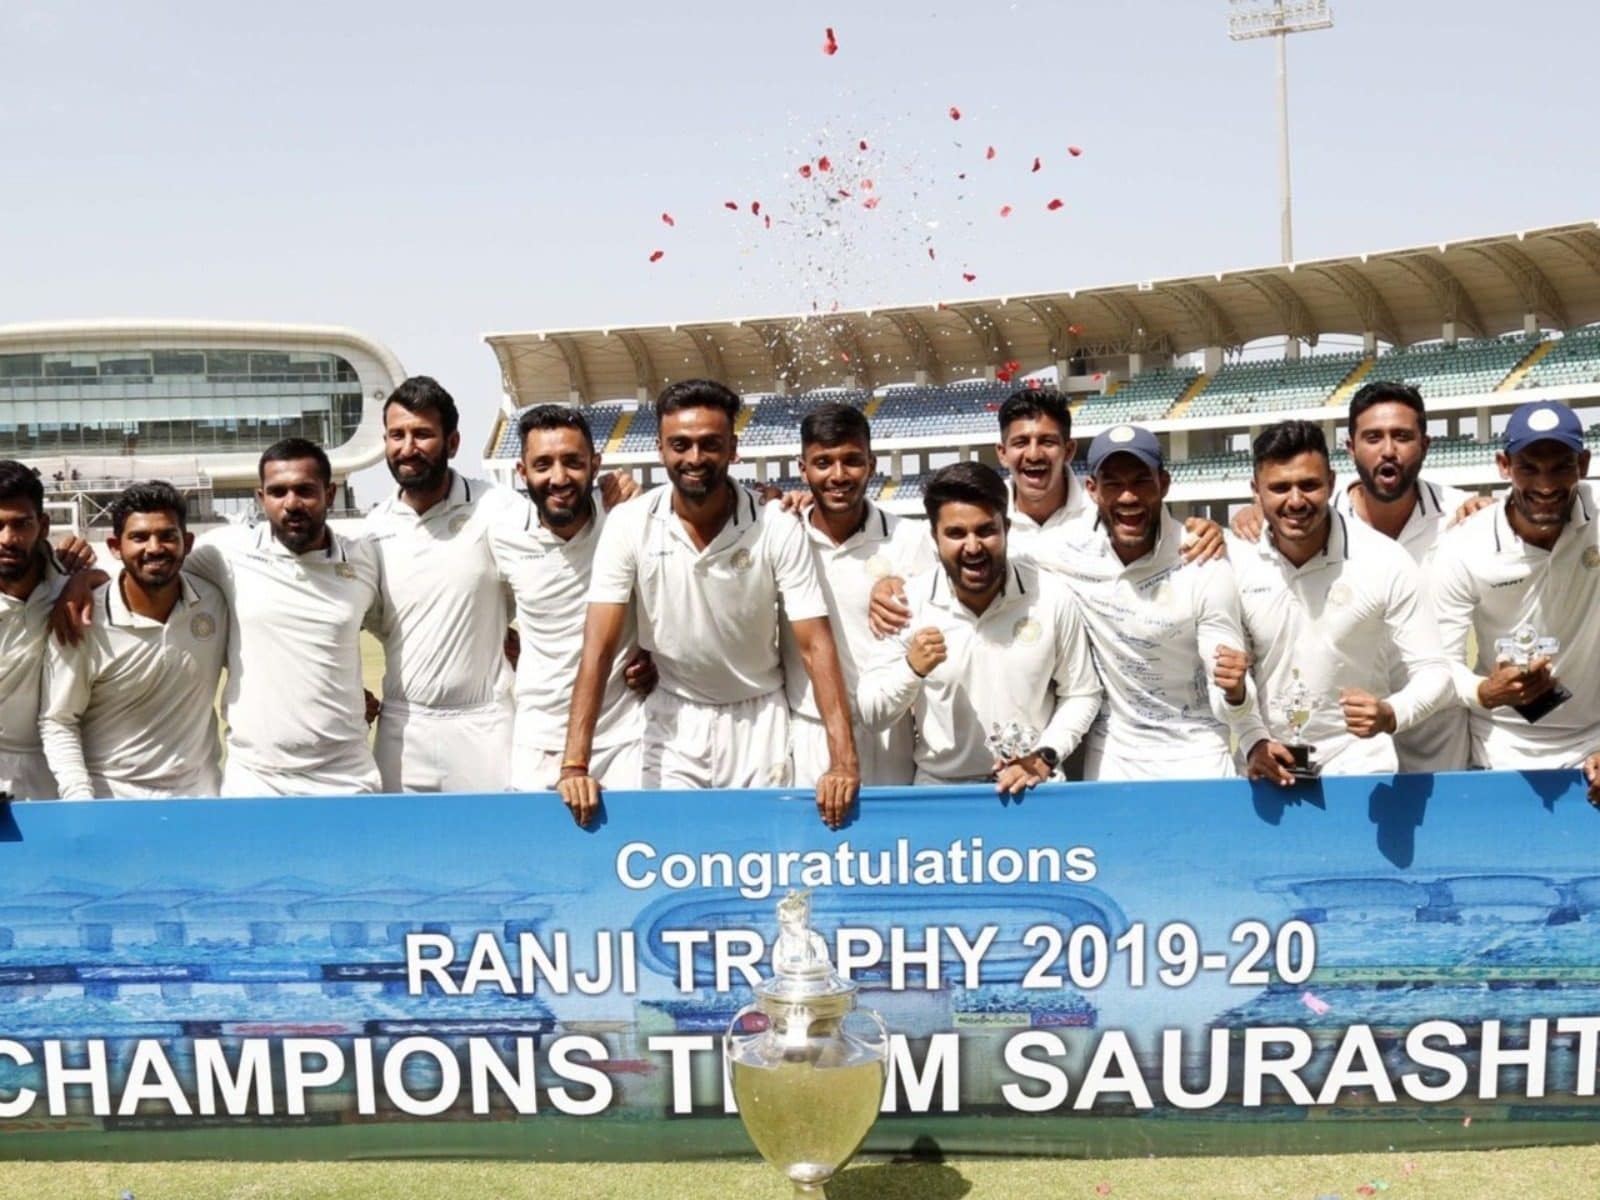 Ranji Trophy 2022 Full schedule, squads, match timings, and live streaming details